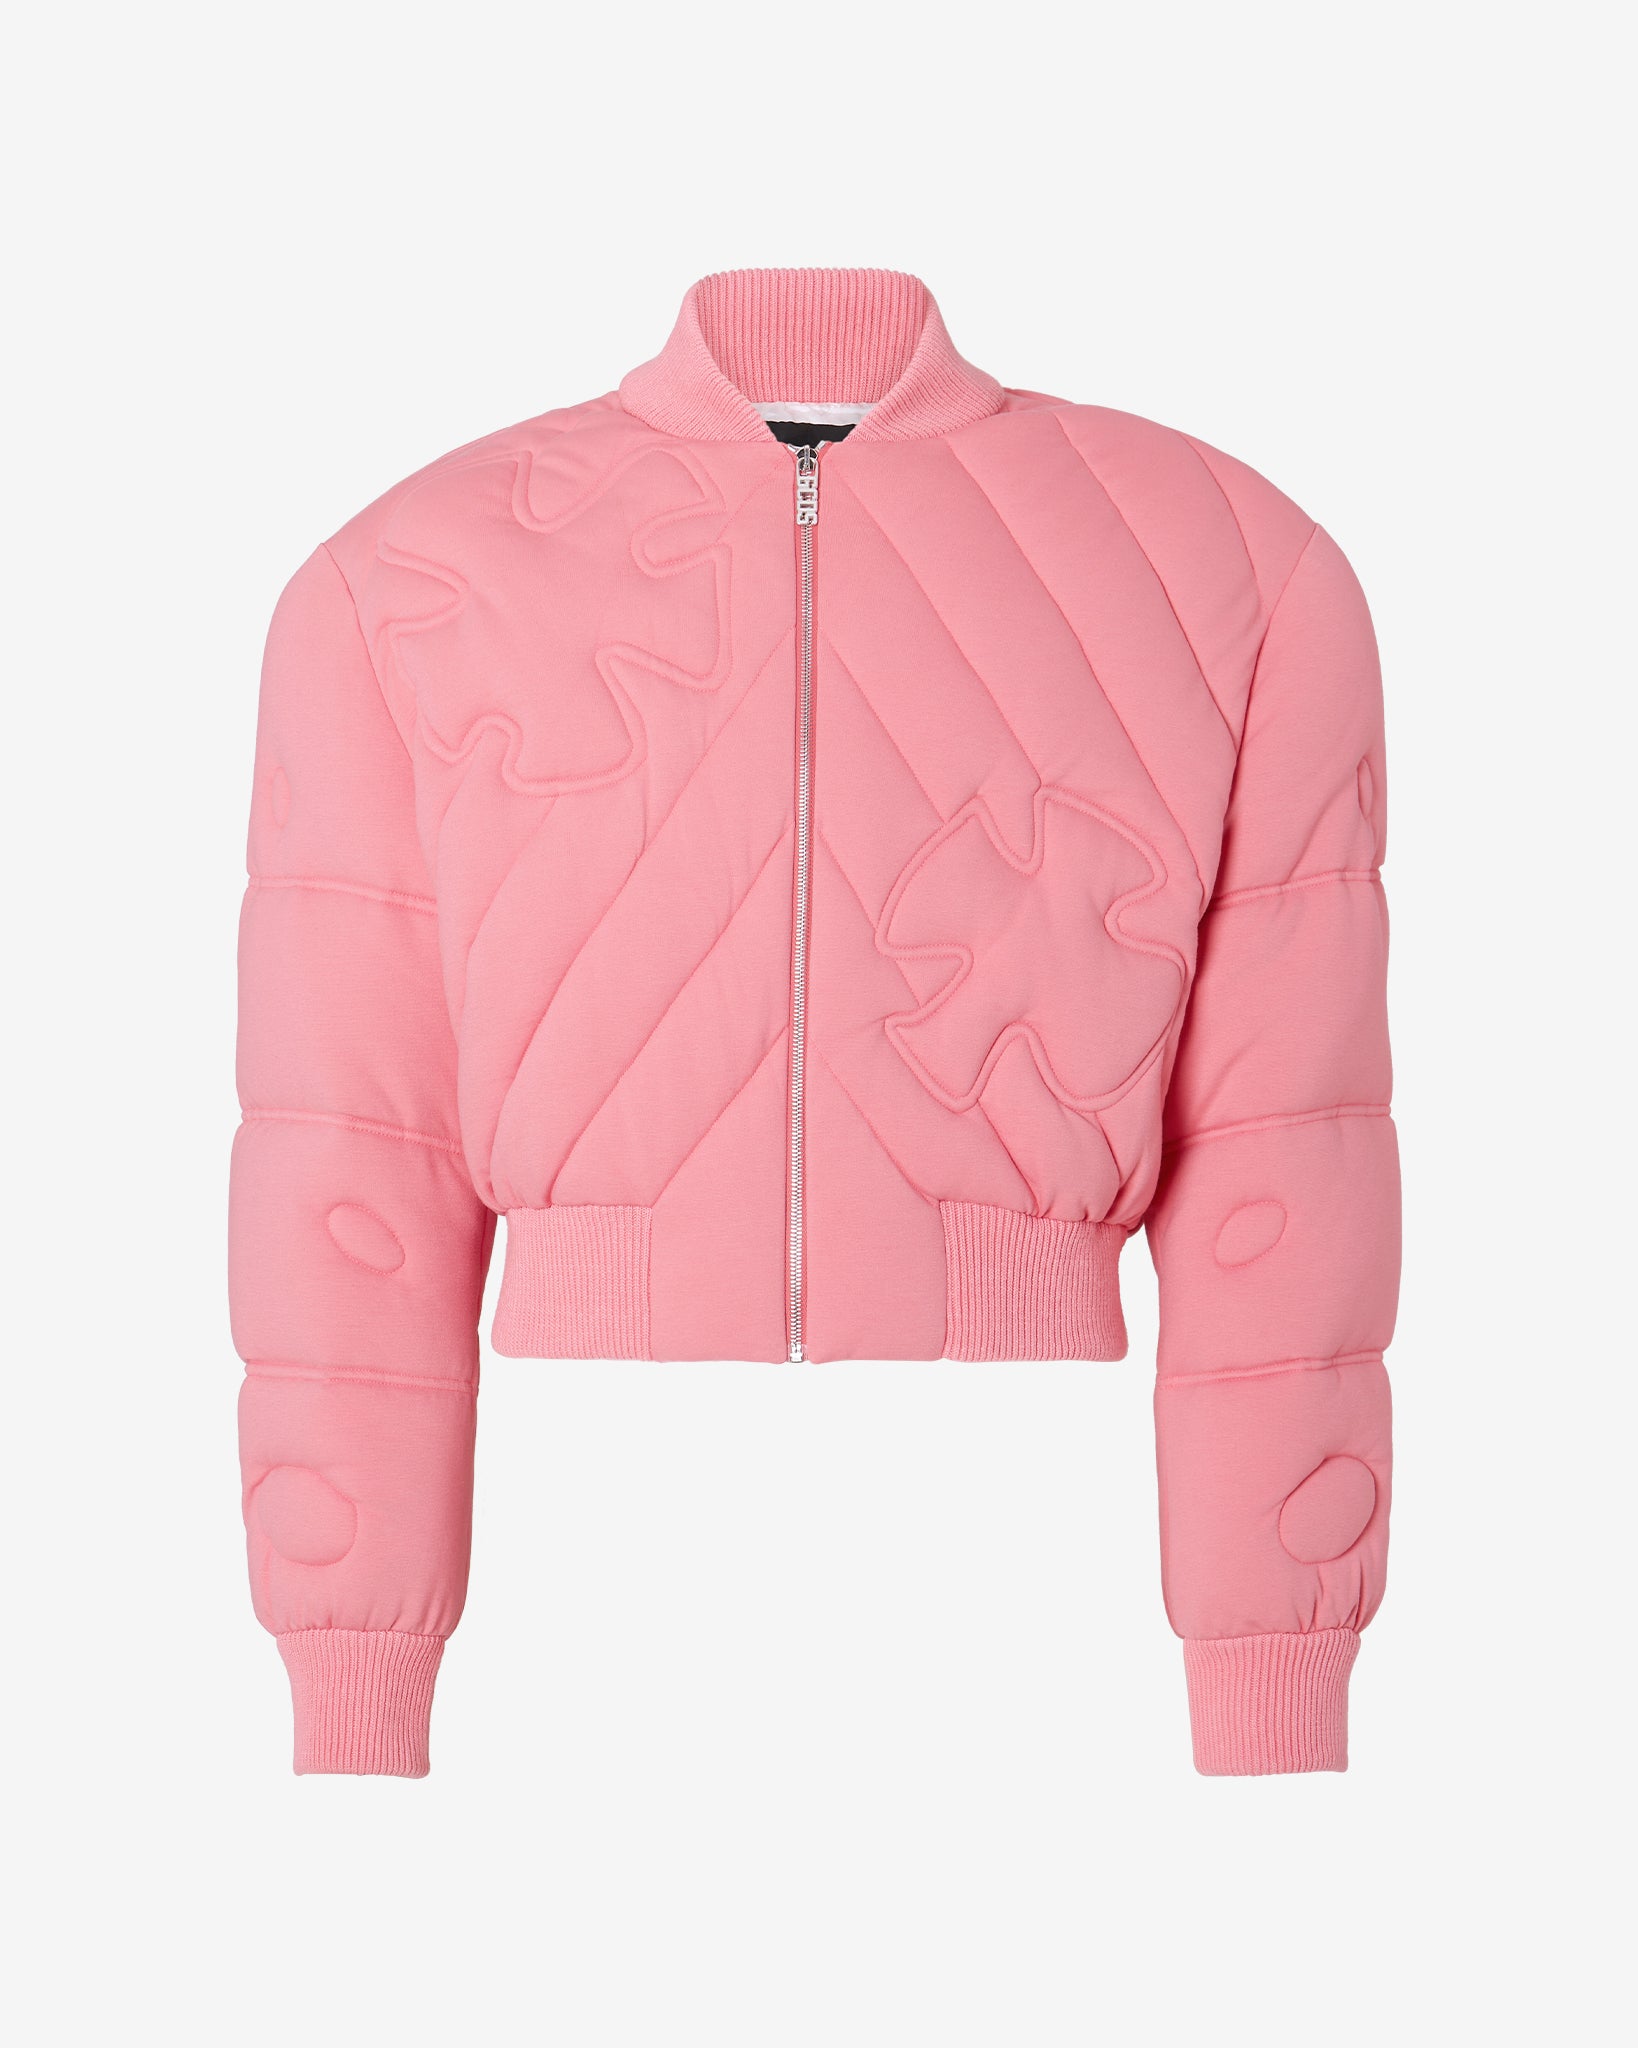 Patrick Hand Embroidered Cropped Bomber : Men Outerwear Lilac